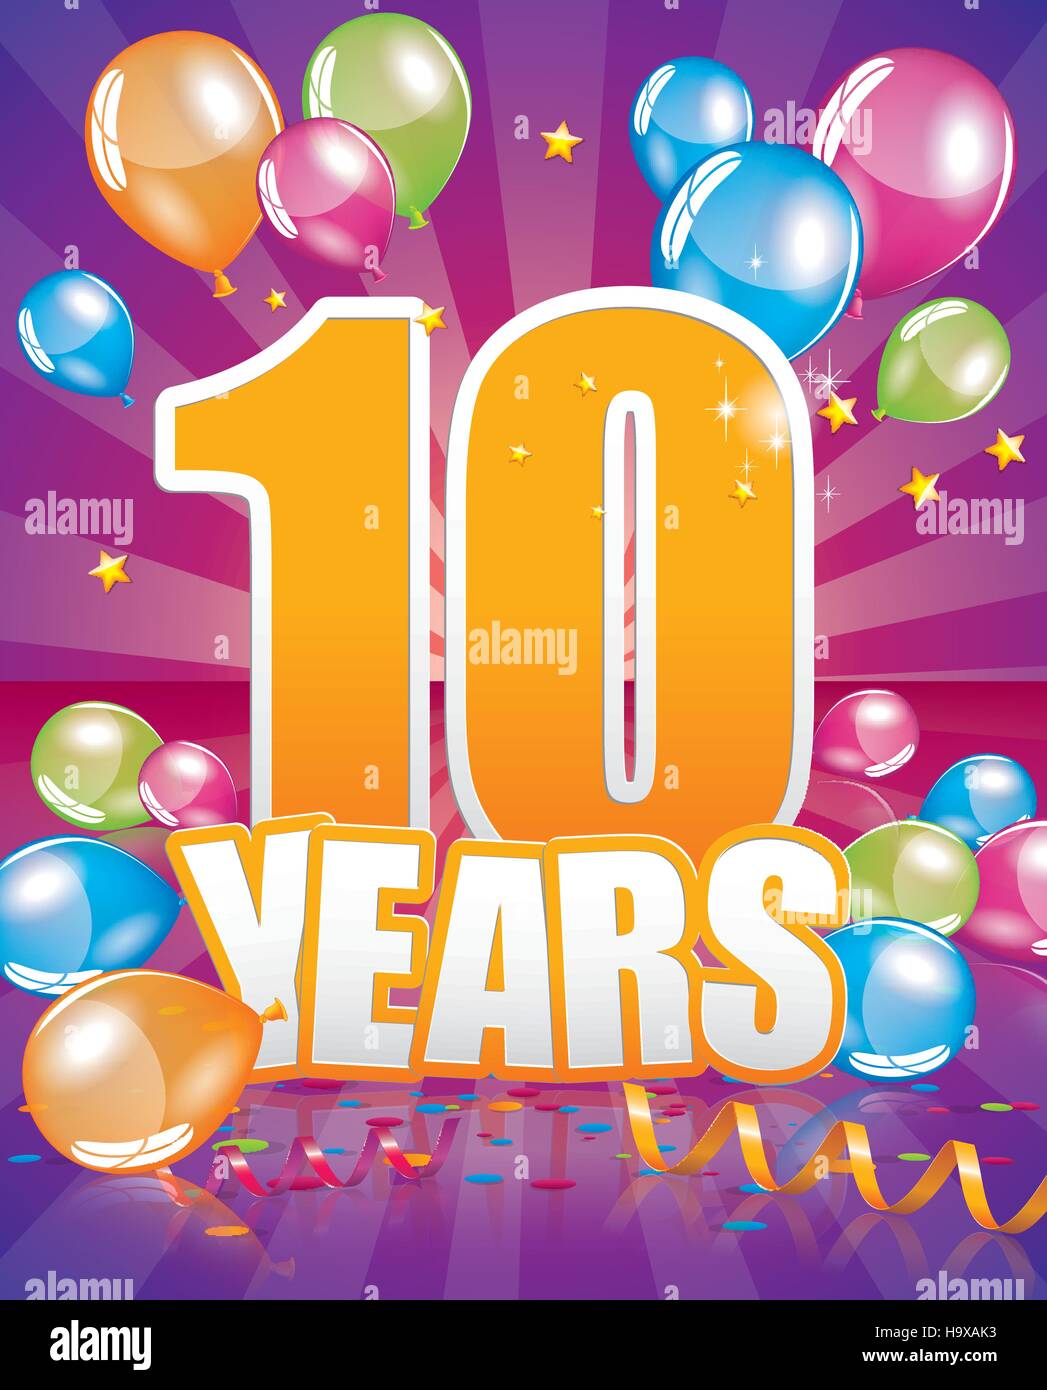 10 years birthday card full vector elements Stock Vector Image